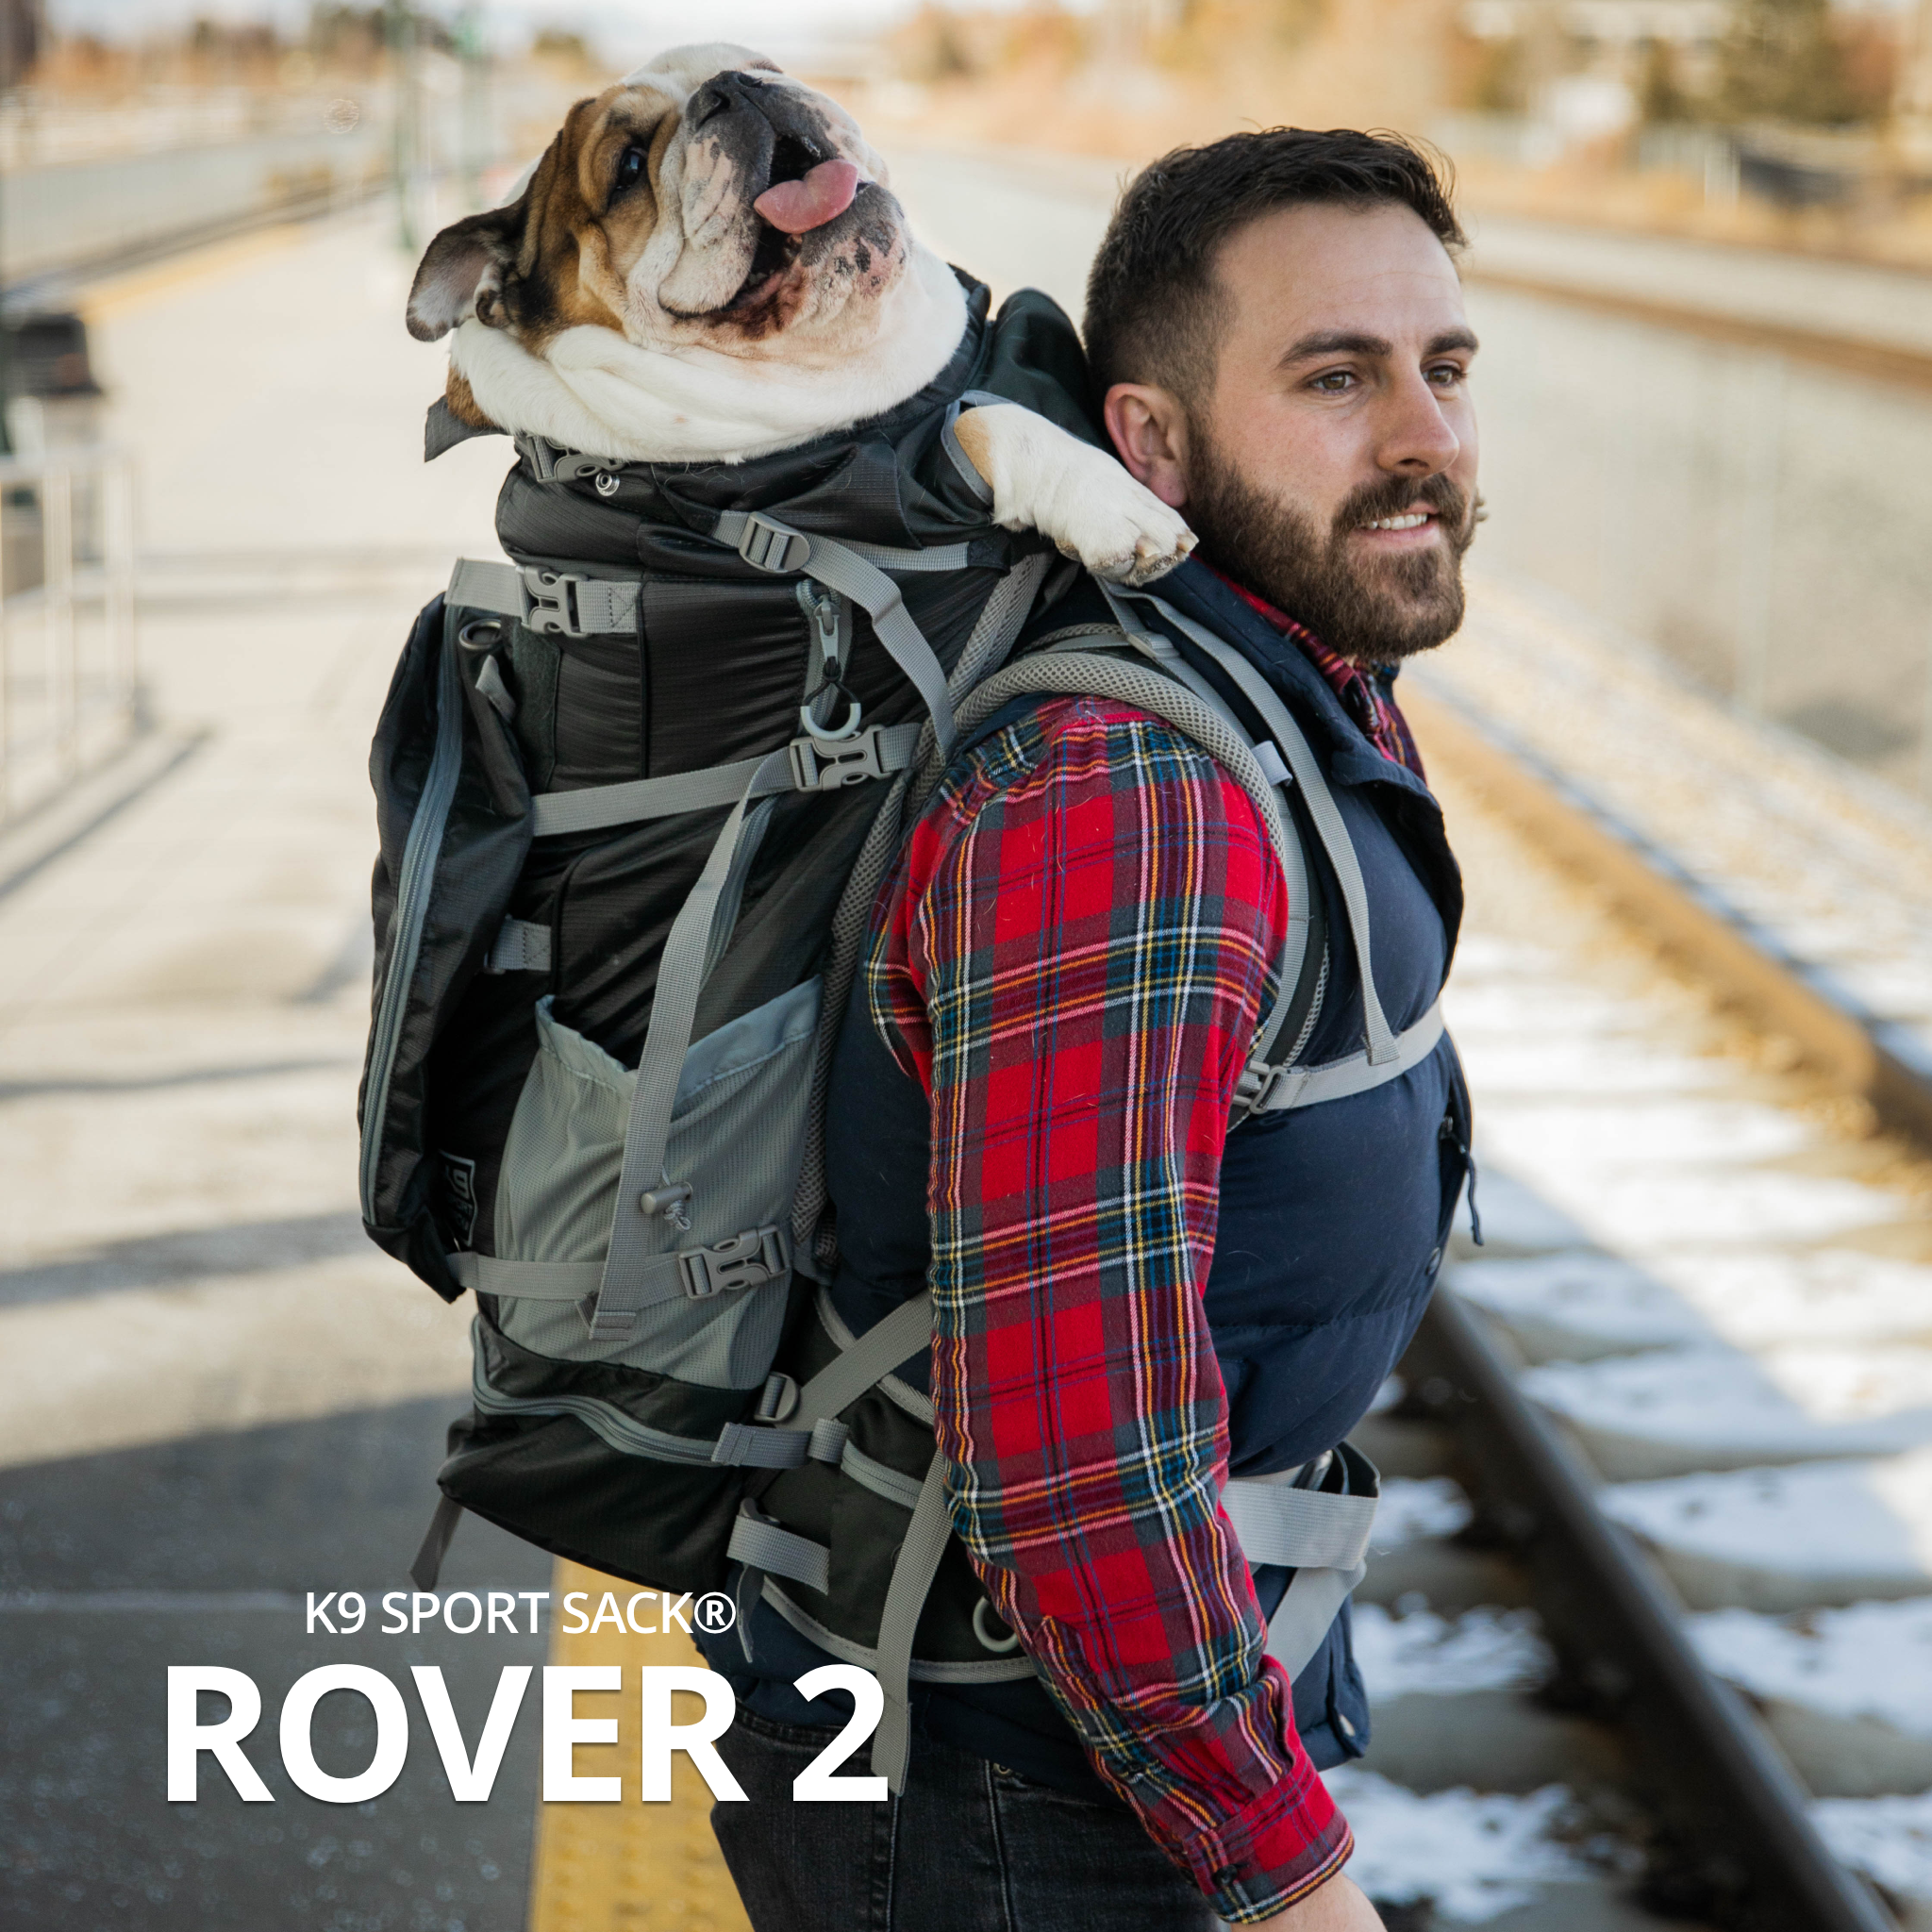 The Rover 2